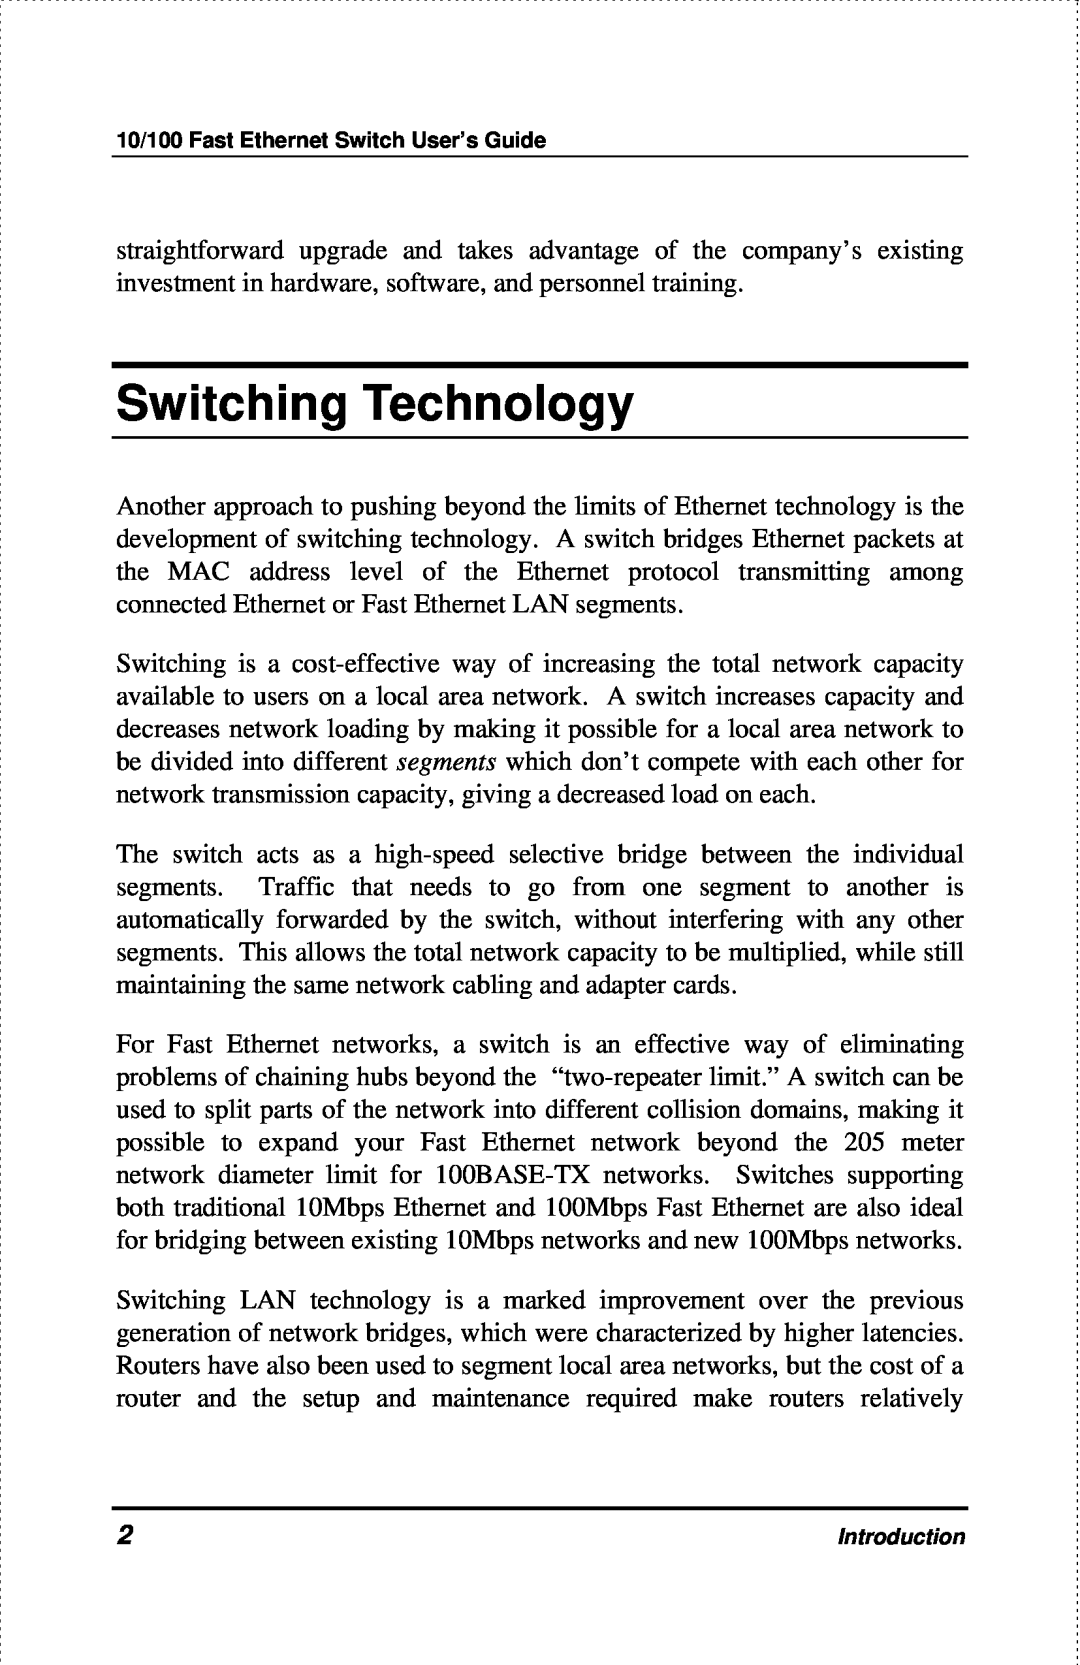 D-Link DES-1004 manual Switching Technology, Introduction 